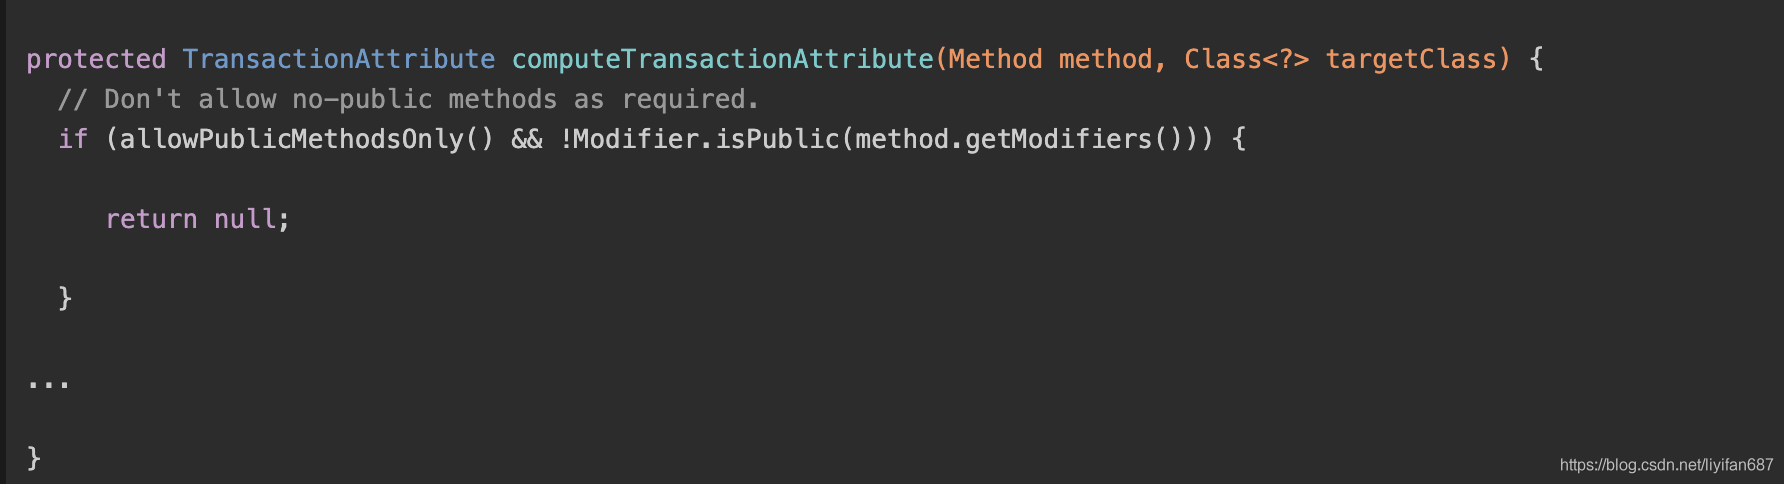 protected TransactionAttribute computeTransactionAttribute(Method method, Class<?> targetClass) {// Don't allow no-public methods as required.if (allowPublicMethodsOnly() && !Modifier.isPublic(method.getModifiers())) {return null;}...}